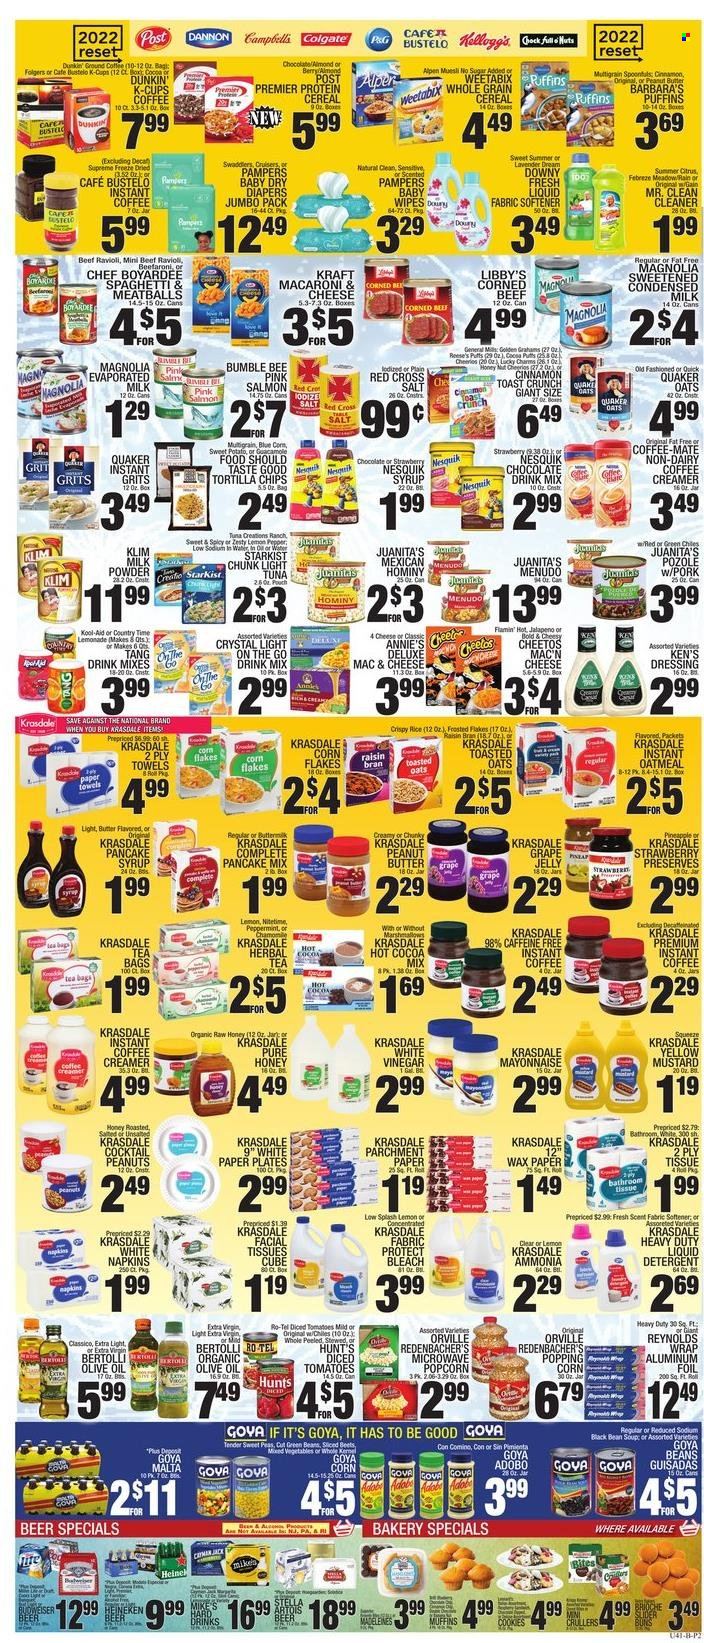 thumbnail - C-Town Flyer - 12/31/2021 - 01/06/2022 - Sales products - tomatoes, salmon, tuna, StarKist, ravioli, spaghetti, meatballs, soup, Bumble Bee, Quaker, Kraft®, Bertolli, corned beef, Nesquik, Dannon, Coffee-Mate, evaporated milk, condensed milk, milk powder, butter, creamer, mayonnaise, Reese's, chocolate, jelly, tortilla chips, Cheetos, chips, popcorn, oatmeal, grits, Goya, Chef Boyardee, cereals, Cheerios, corn flakes, muesli, Weetabix, Raisin Bran, toasted oats, cinnamon, adobo sauce, mustard, dressing, Classico, olive oil, honey, pancake syrup, syrup, peanuts, lemonade, Country Time, chocolate drink, hot cocoa, tea, herbal tea, instant coffee, Folgers, coffee capsules, K-Cups, beer, Heineken, beef meat. Page 2.